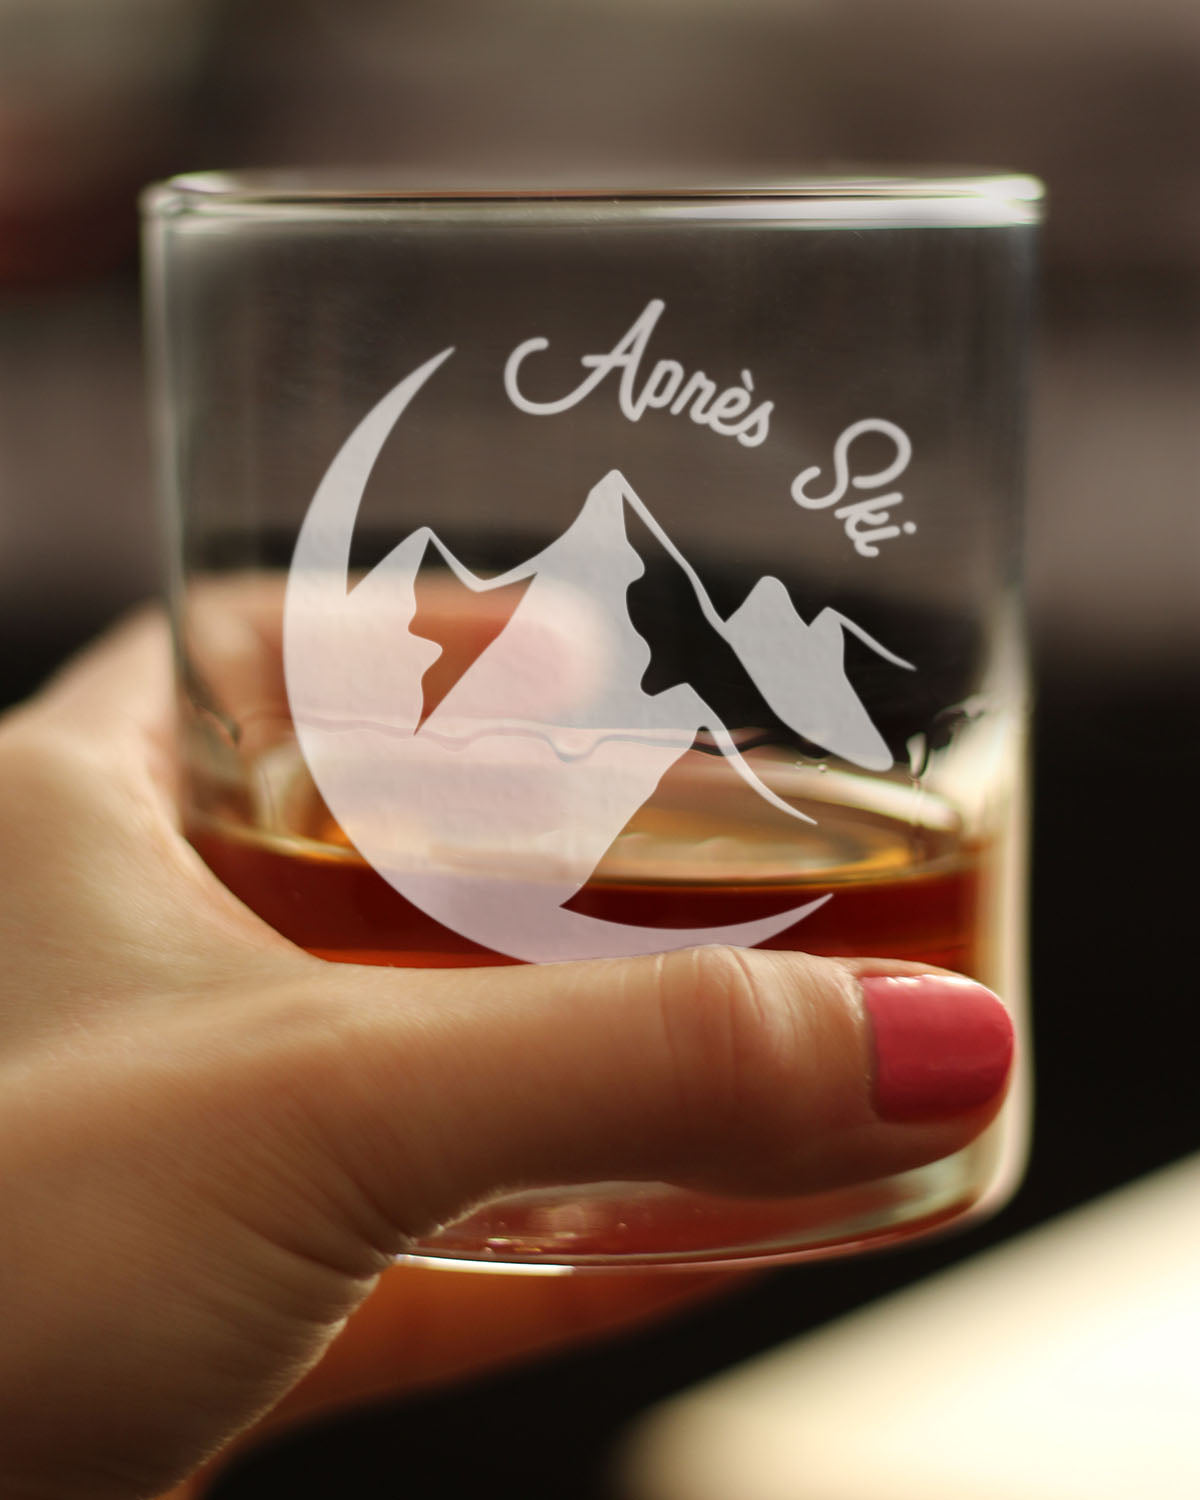 Apres Ski - Whiskey Rocks Glass - Unique Skiing Themed Decor and Gifts for Mountain Lovers - 10.25 Oz Glasses